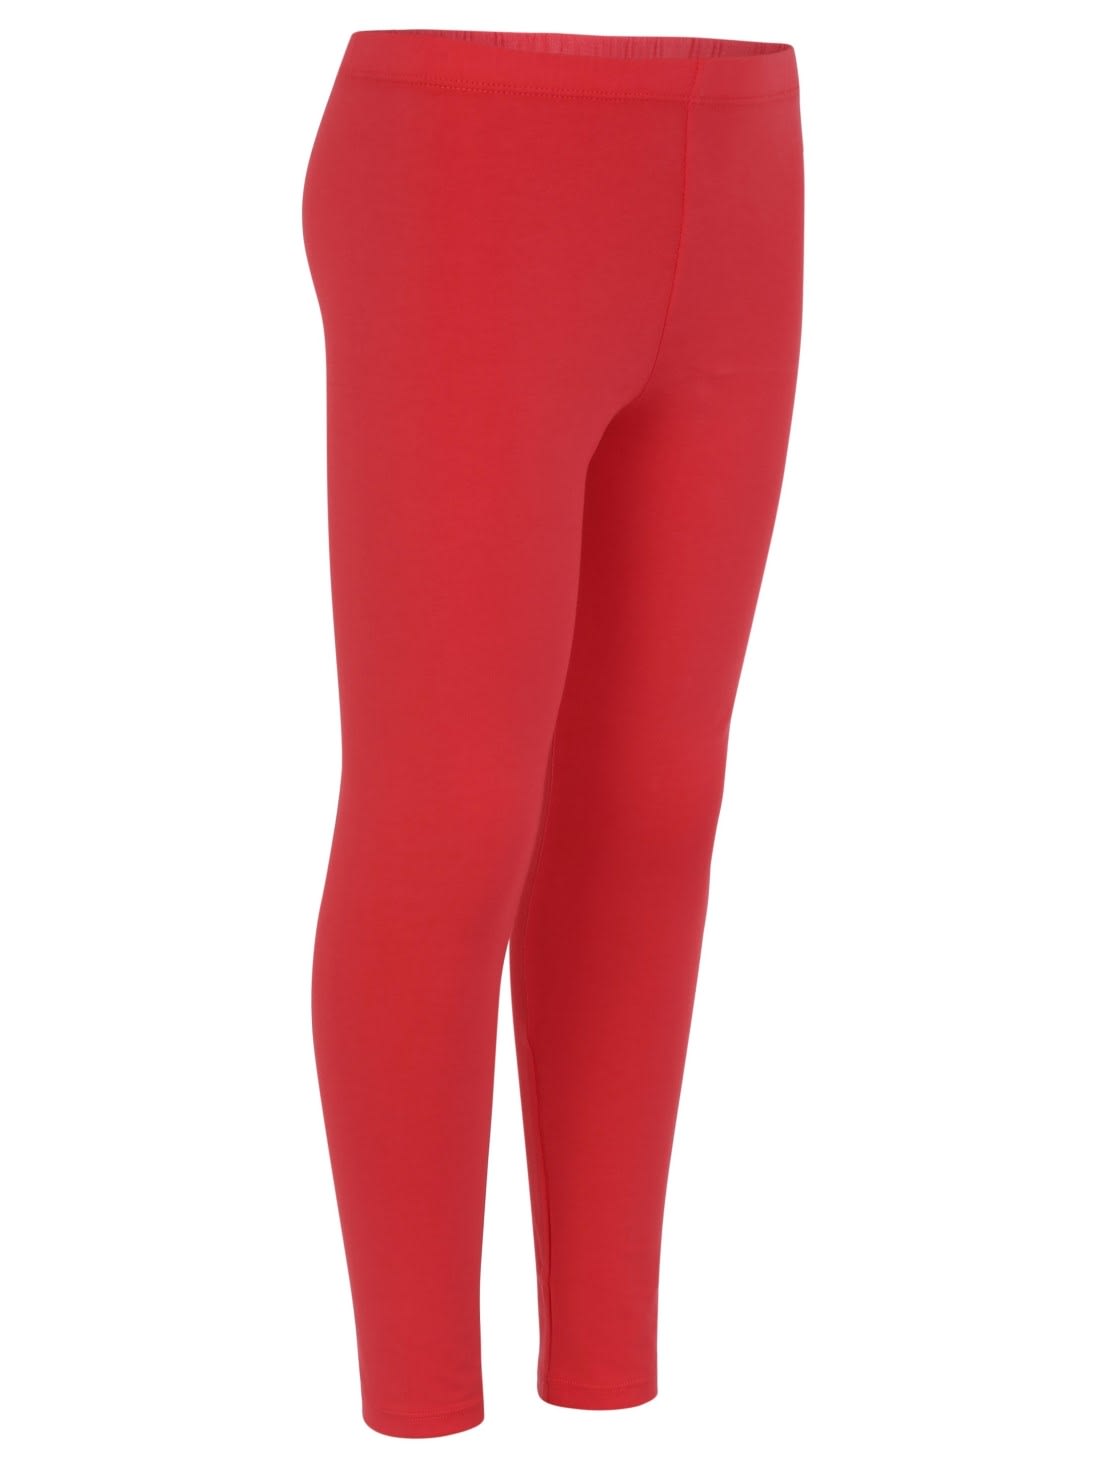 Jockey Leggings For Ladies Online Indiana  International Society of  Precision Agriculture